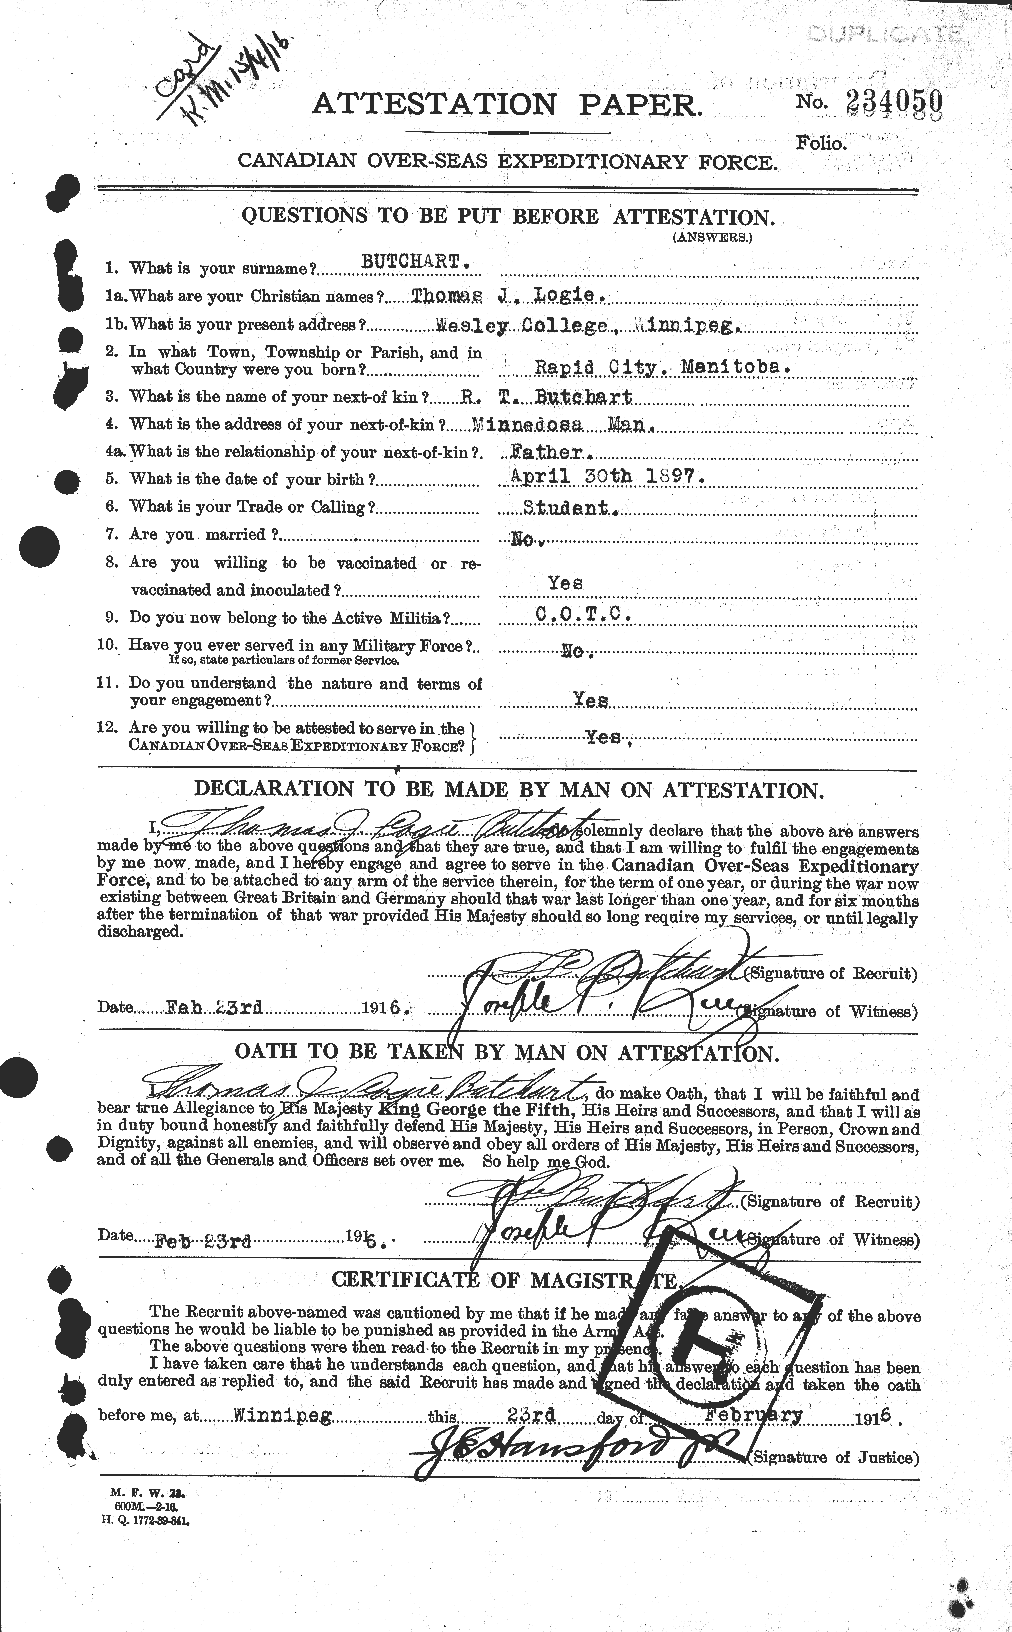 Personnel Records of the First World War - CEF 276182a